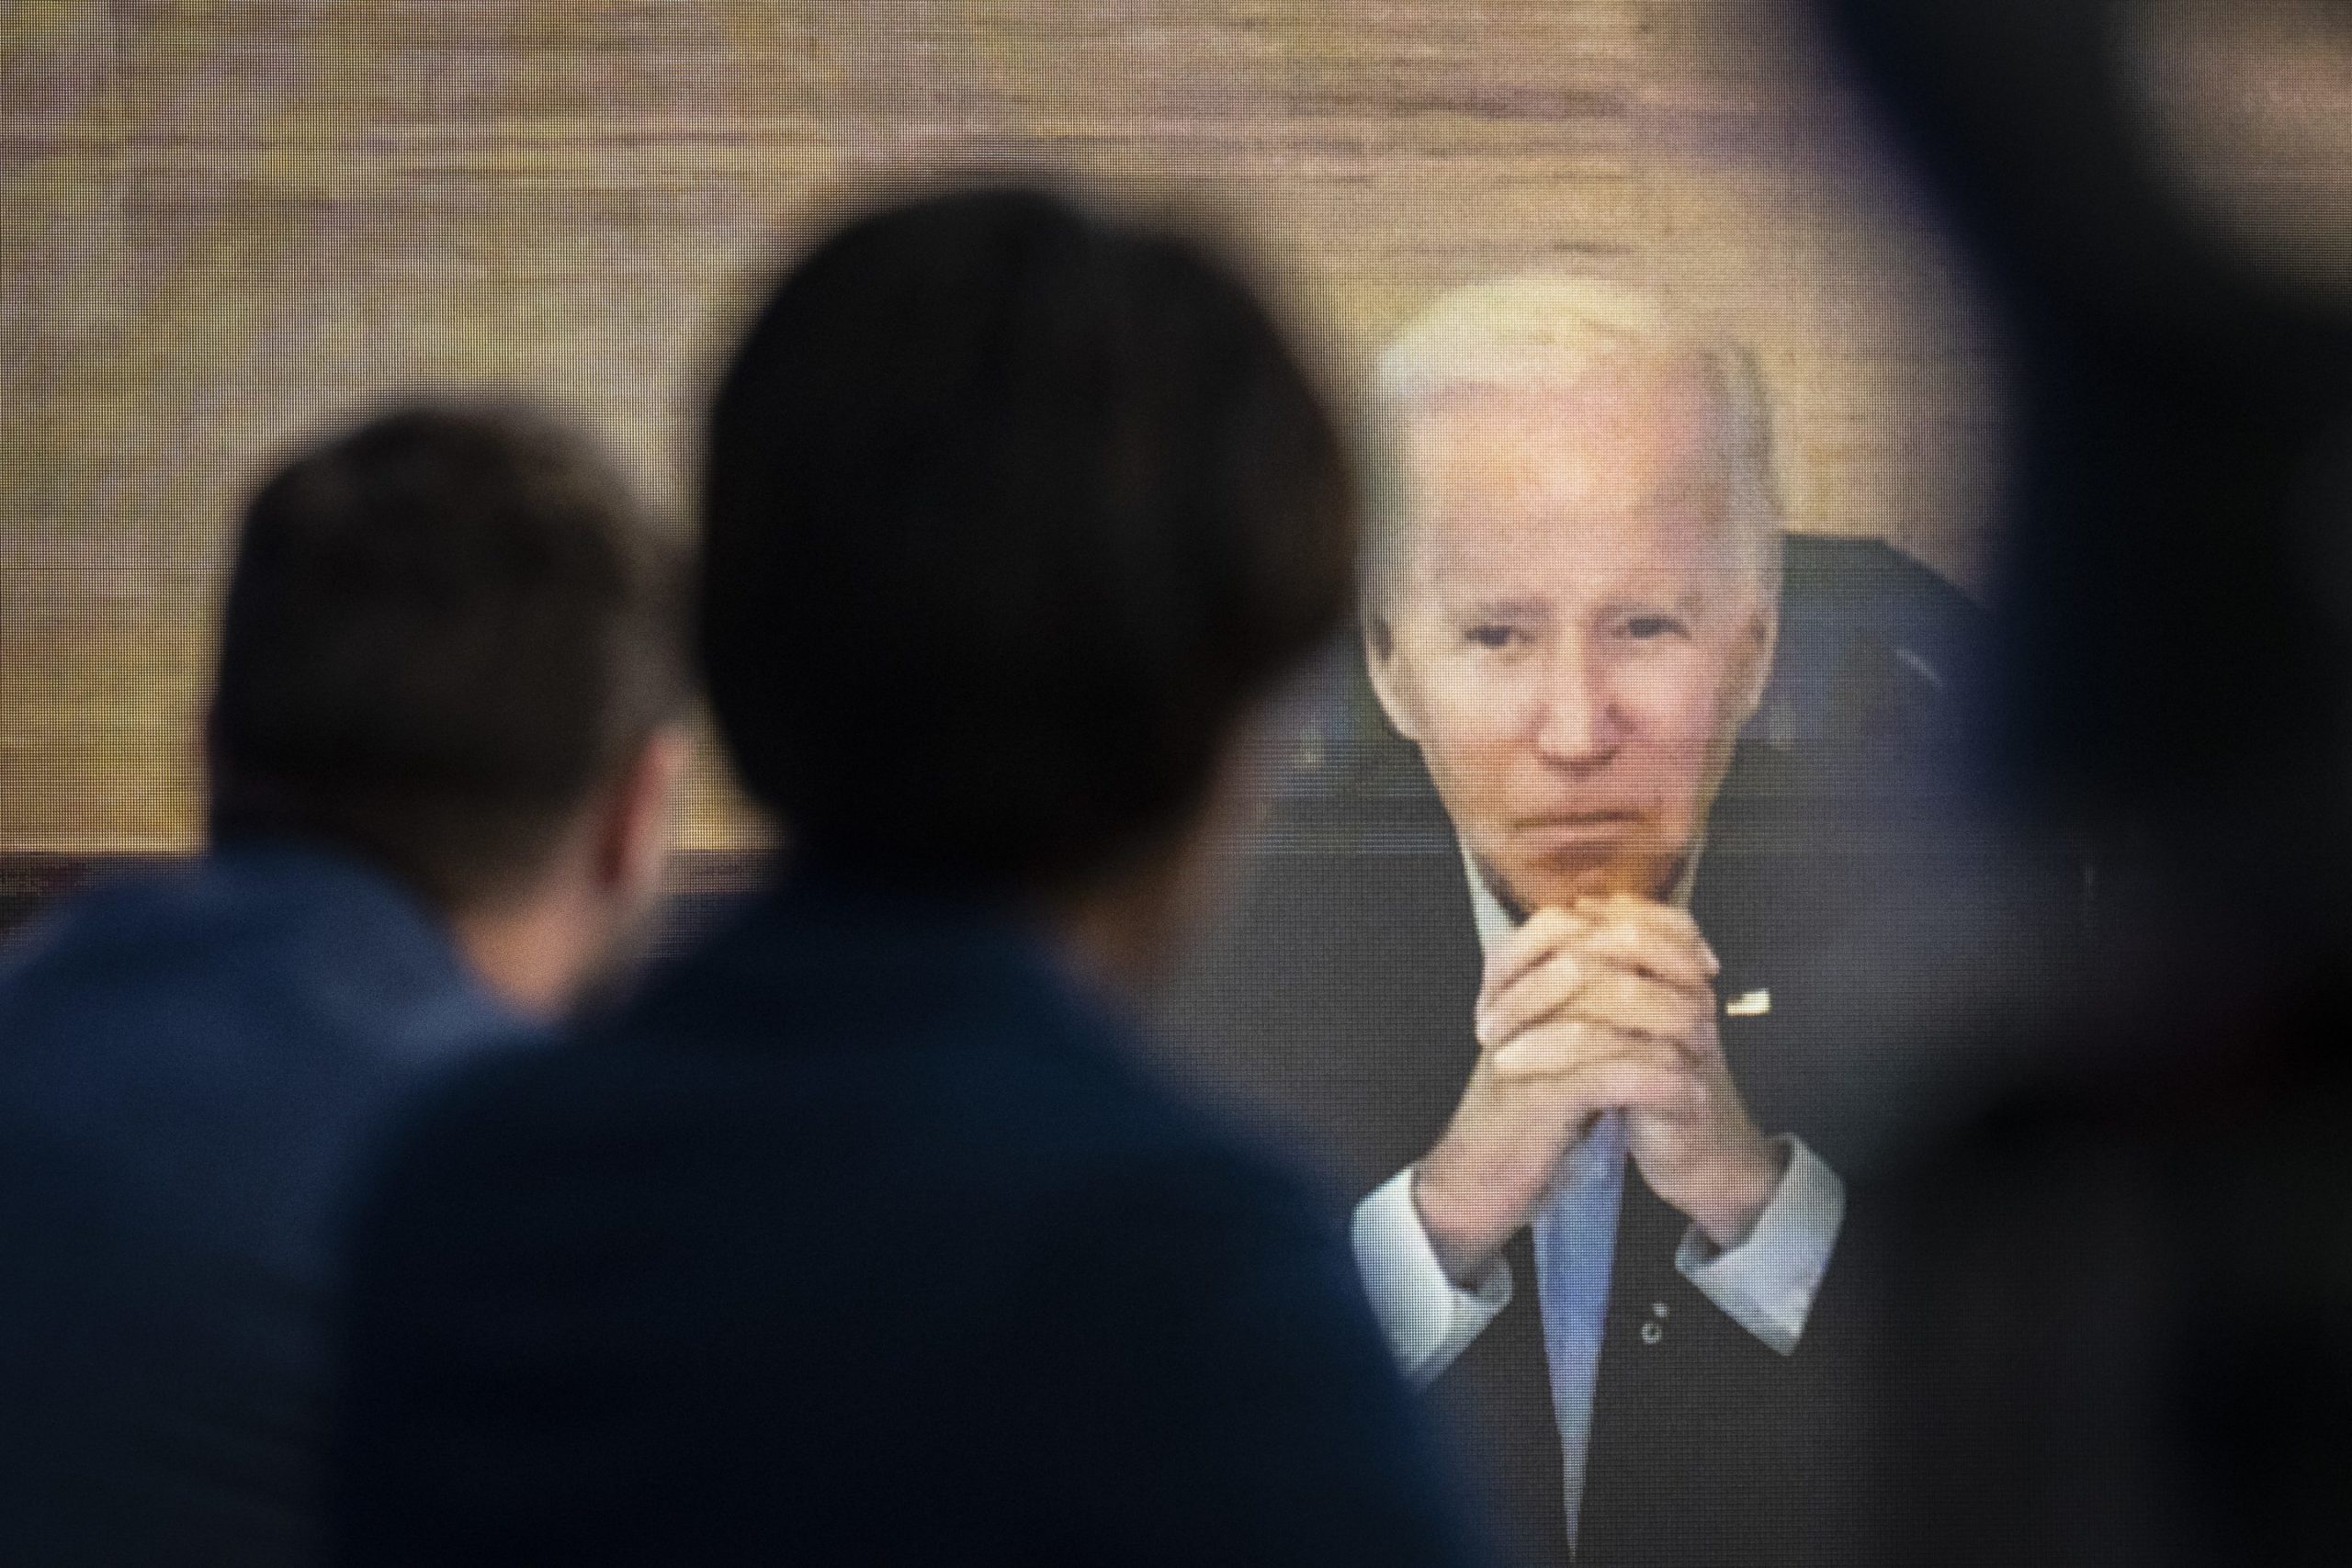 Biden tests negative for COVID again, will isolate until confirmed